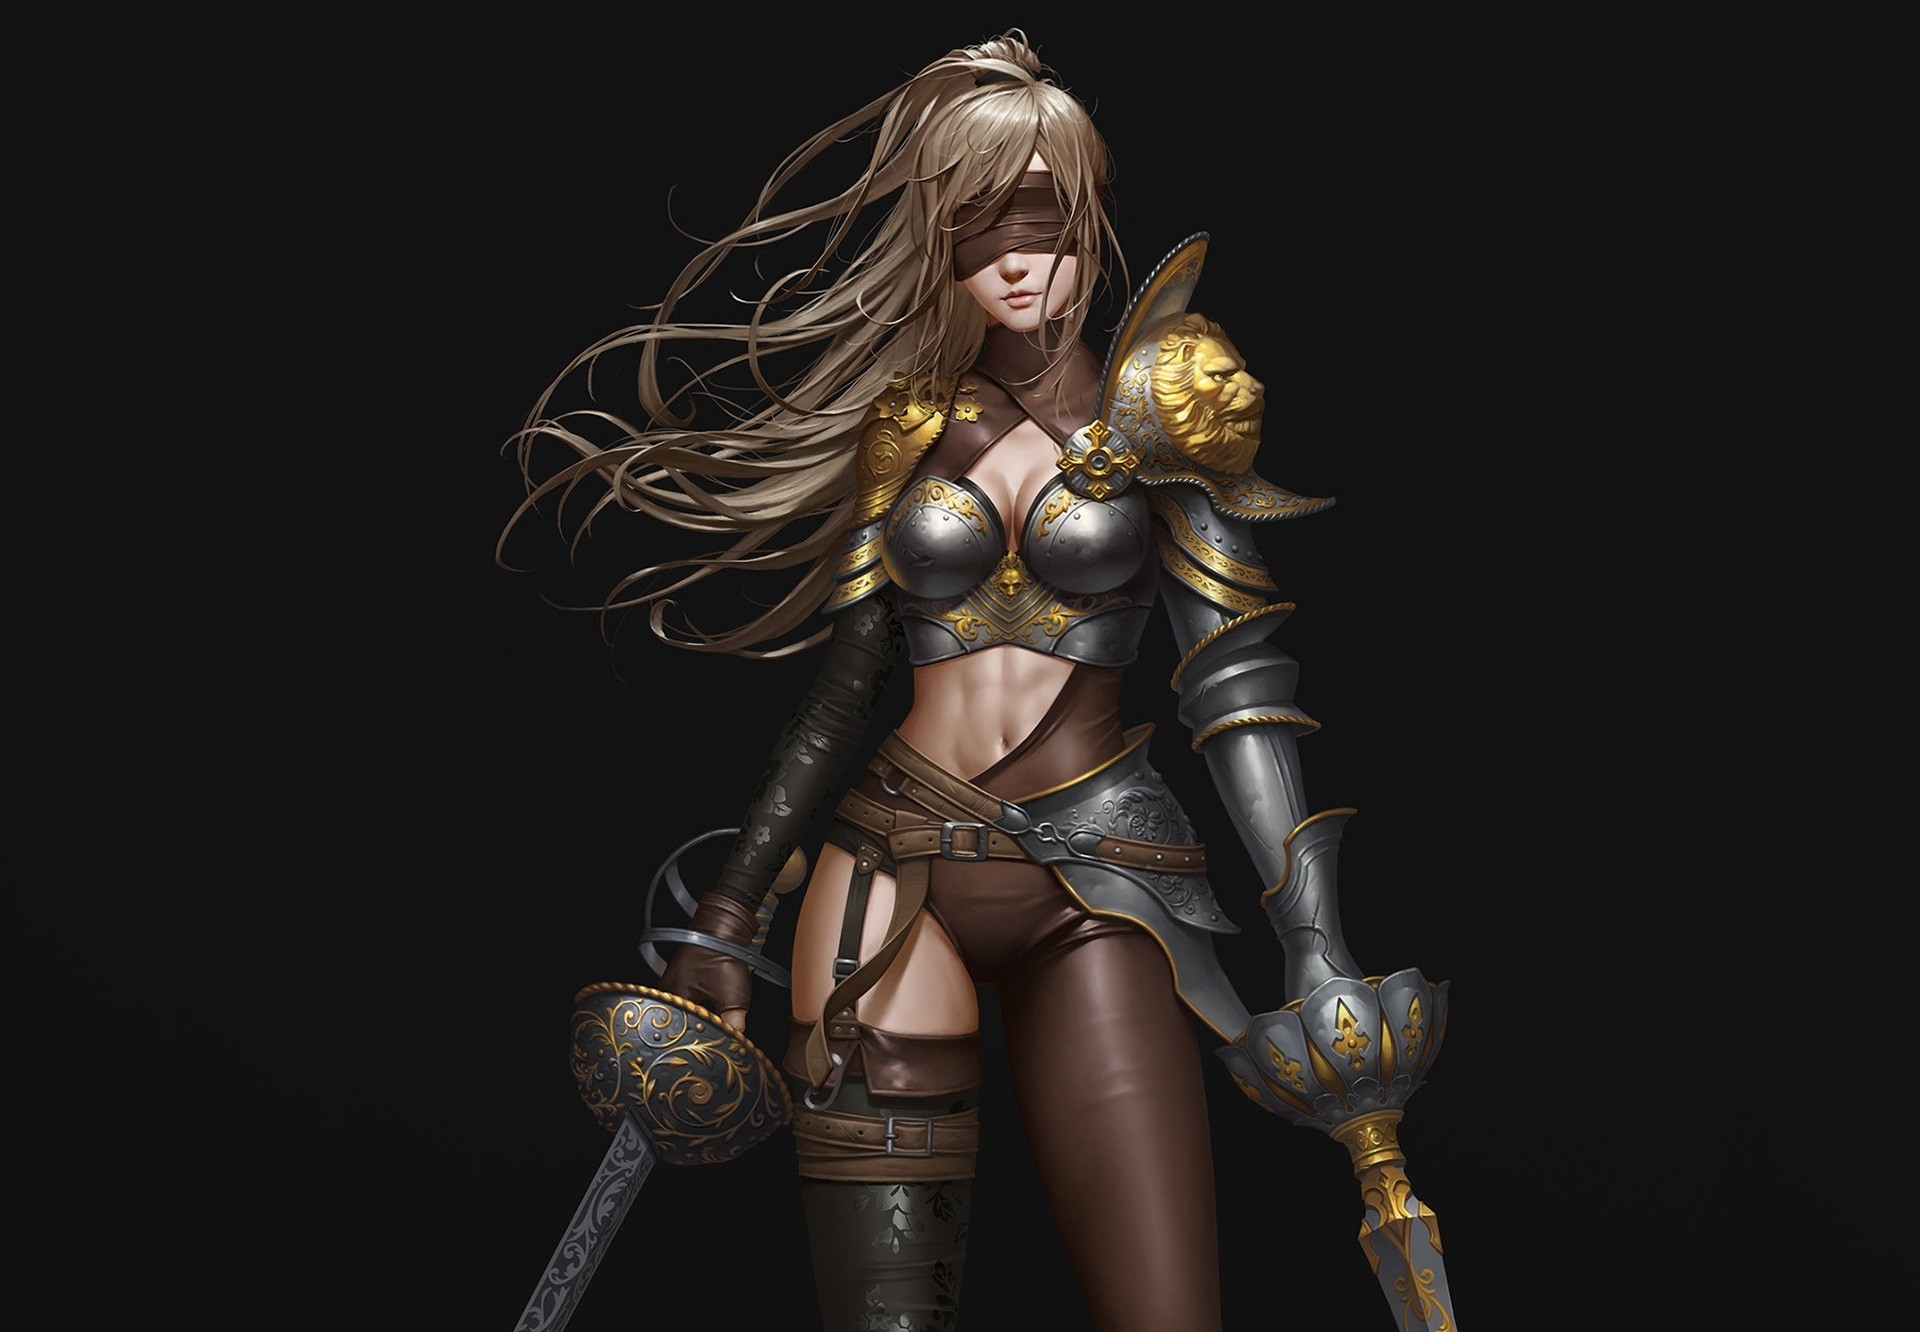 General 1920x1332 fantasy girl black background simple background fantasy art belly button abs armored woman blindfold women armor standing women with weapons sword lance long hair brunette